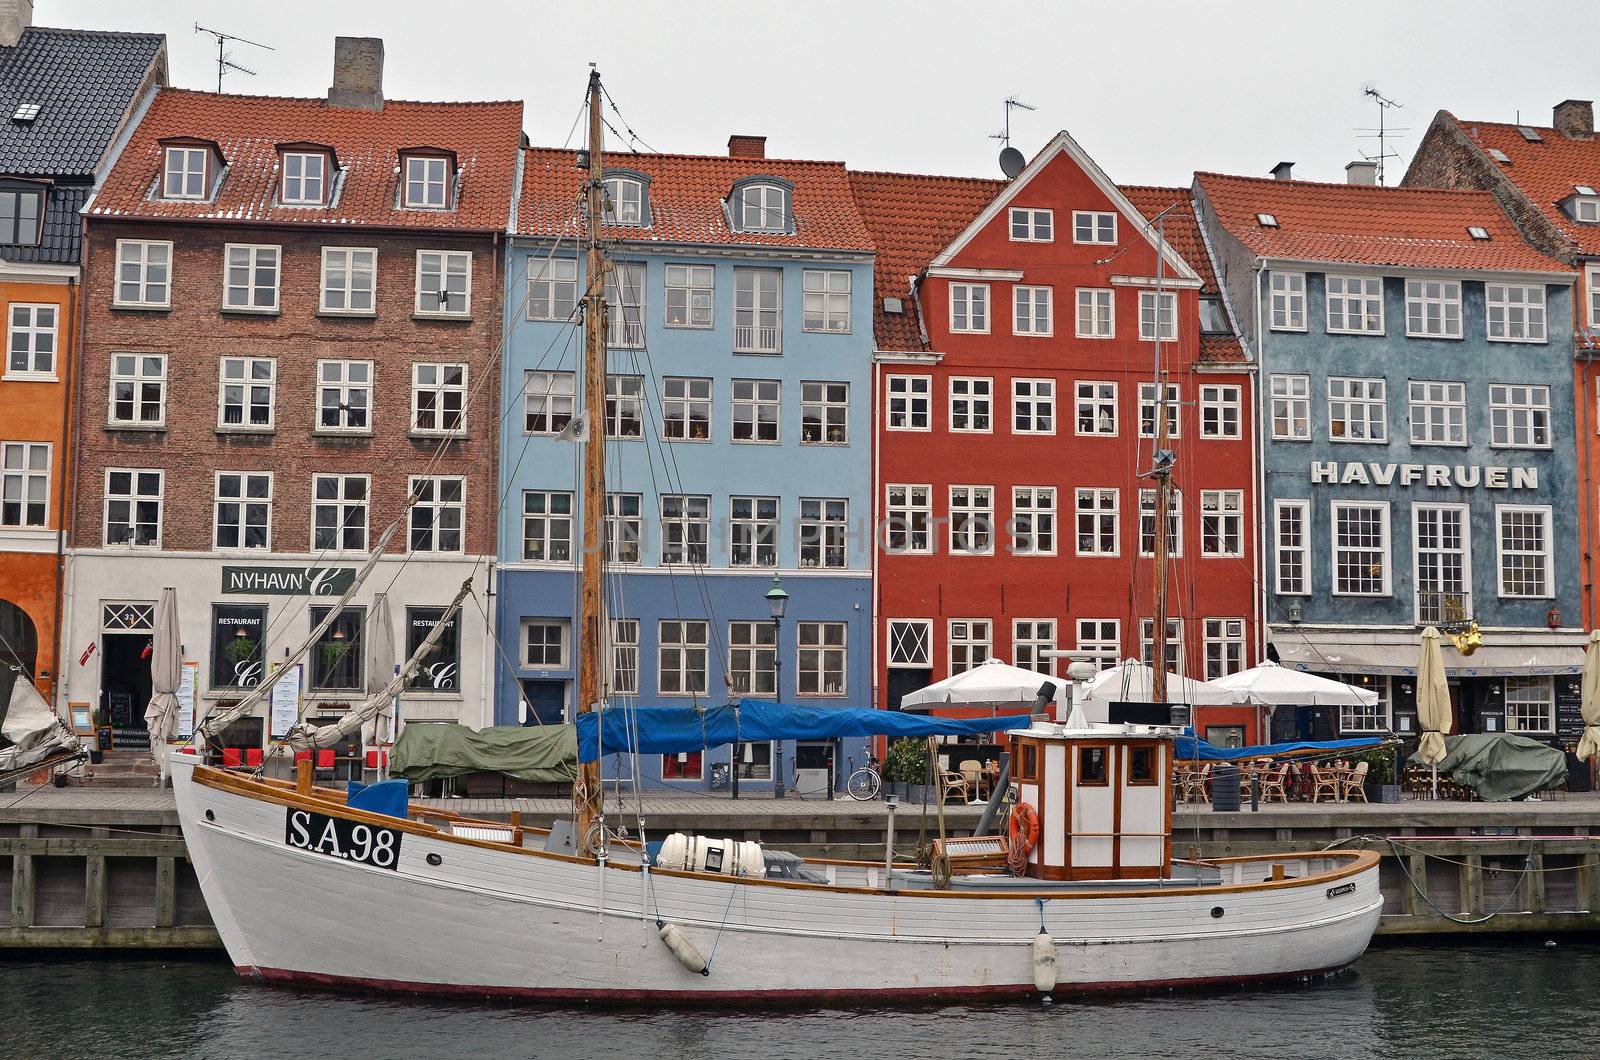 View from Nyhavn in Copenhagen, Denmark with a fishing boat moored.